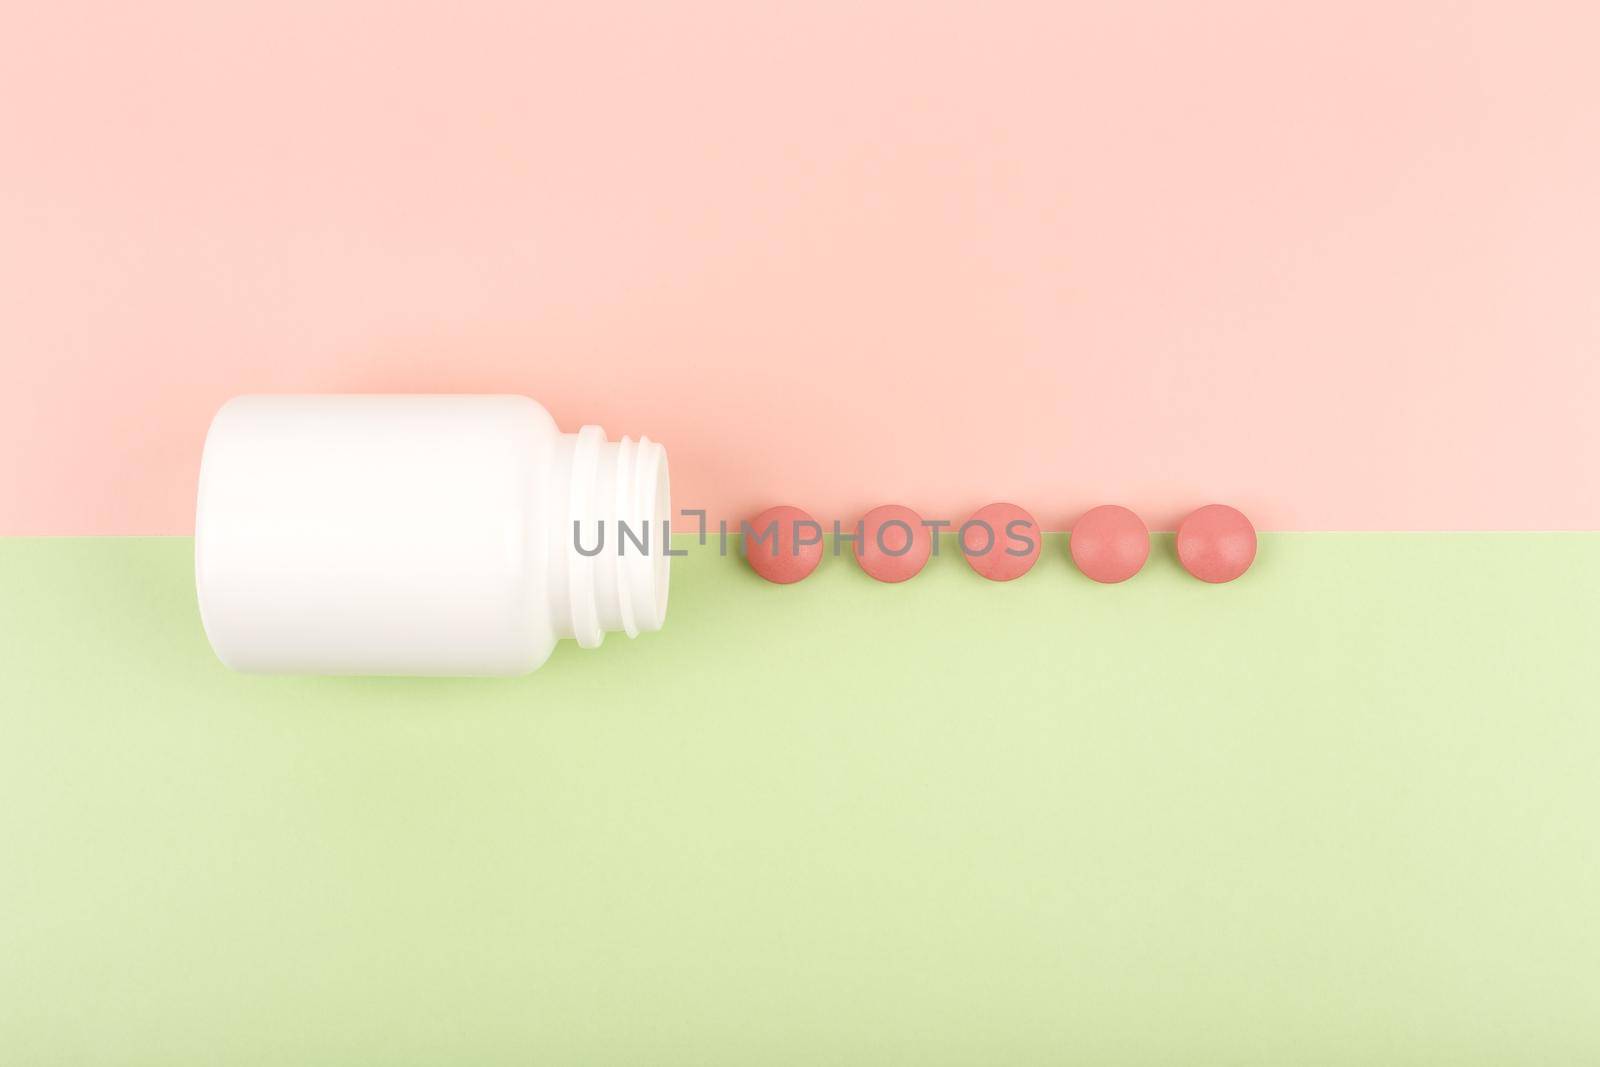 Top view of an opened white medication bottle with spilled red round pills on green and pink background. Concept of pharmacy and medications